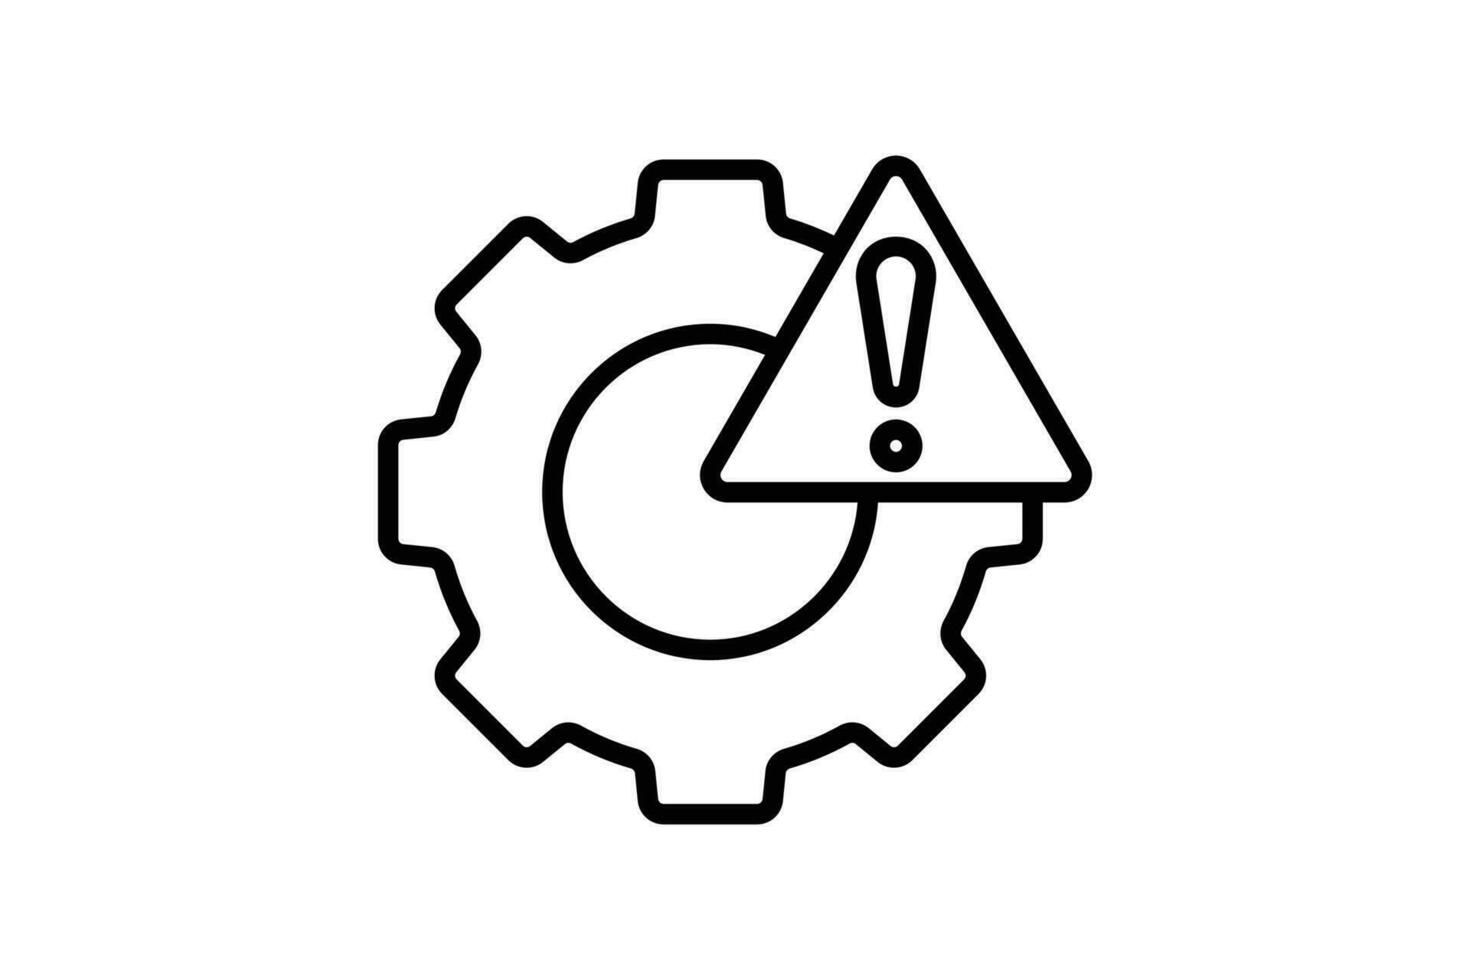 System error icon. gear with exclamation mark. icon related to warning, notification. suitable for web site, app, user interfaces, printable etc. Line icon style. Simple vector design editable